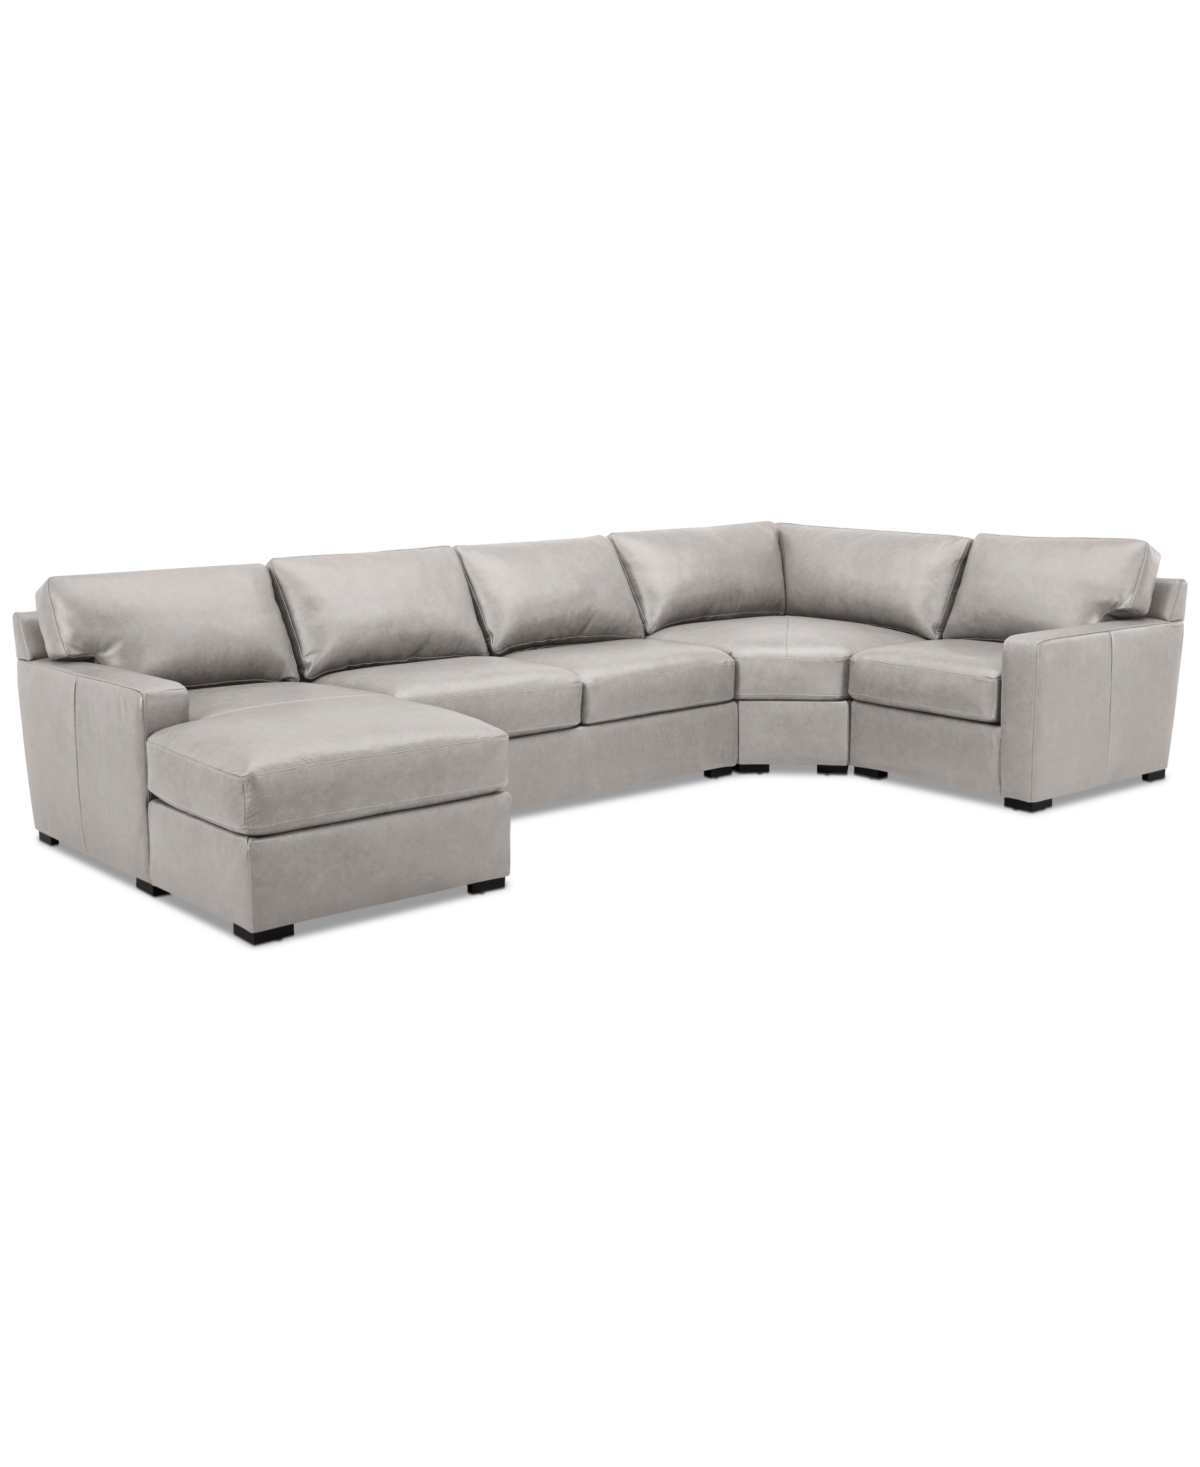 Macy's Radley 148" 4-pc. Leather Wedge Modular Chaise Sectional, Created For  In Gray